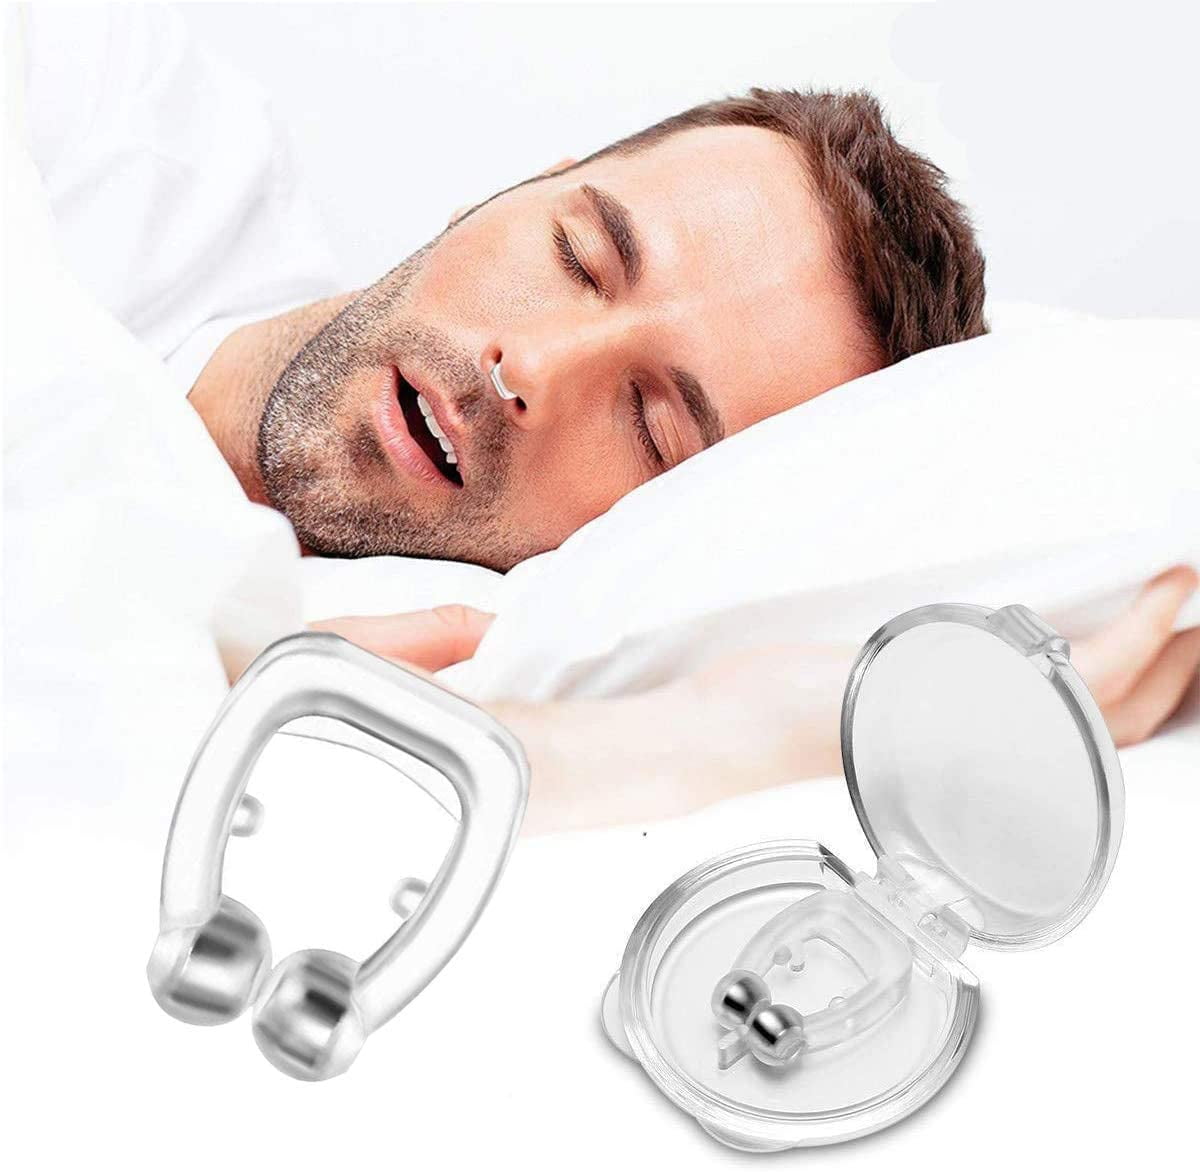 How To Stop Snoring: Tips And Tricks For A Peaceful Night's Sleep